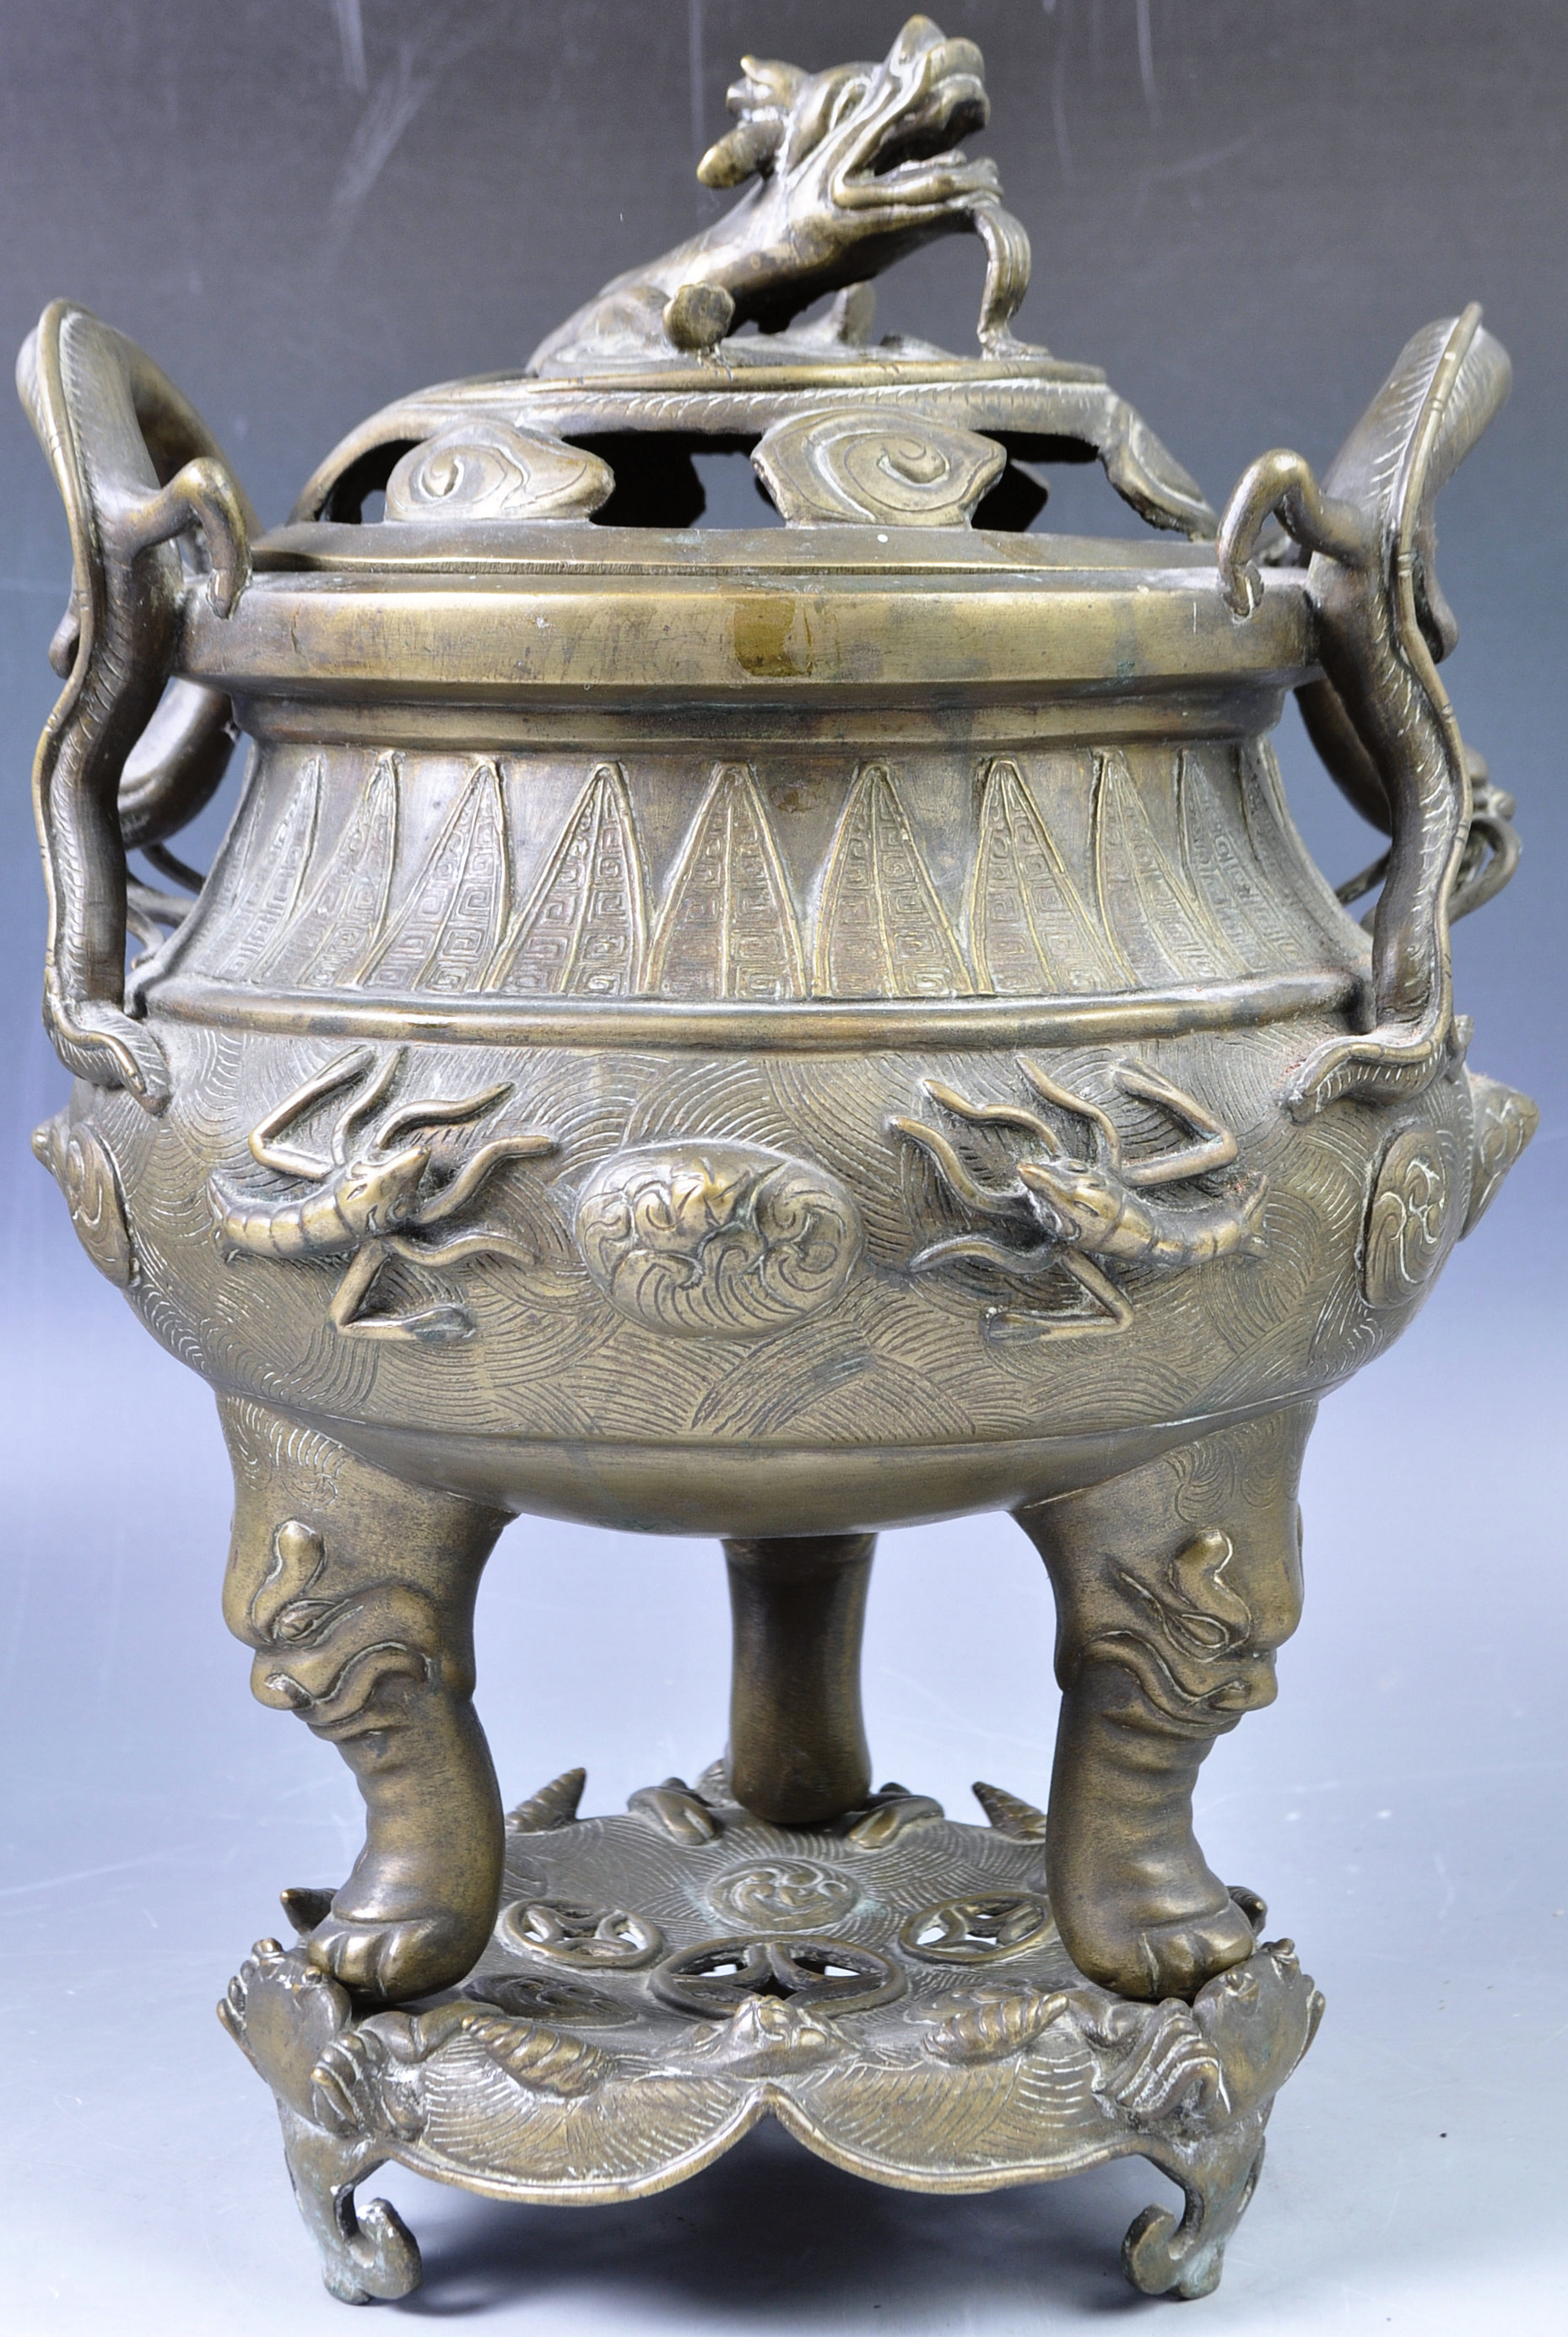 RARE 19TH CENTURY CHINESE BRONZE CENSER WITH PROVENANCE